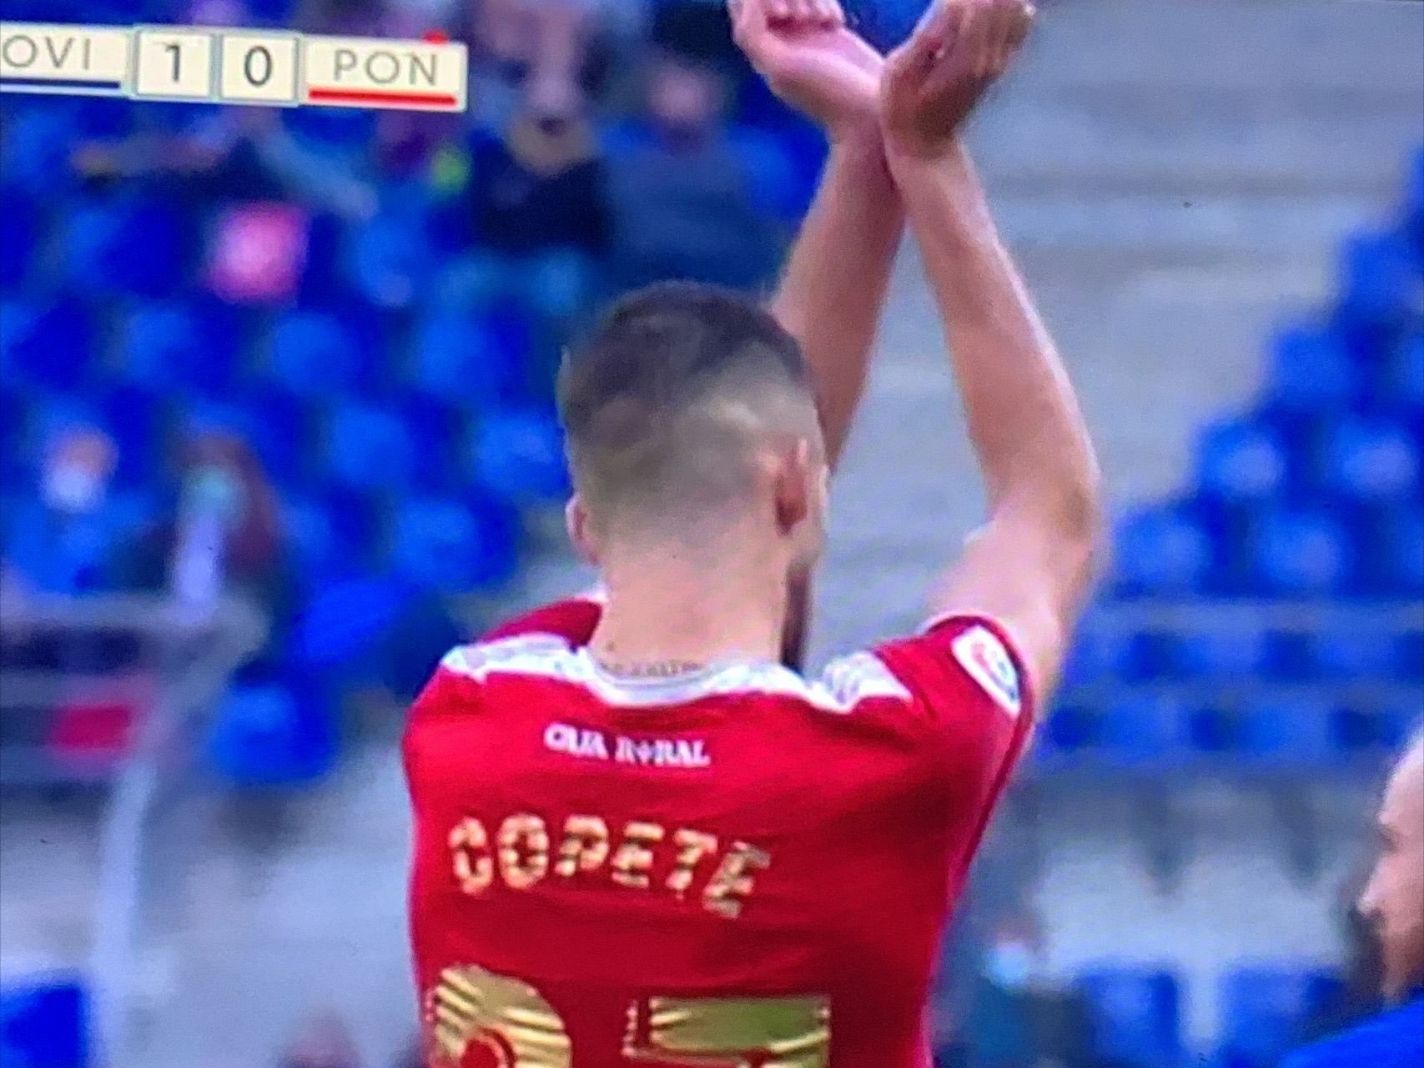 Jose Copete made a handcuffs gesture to referee during to loss to Real Oviedo